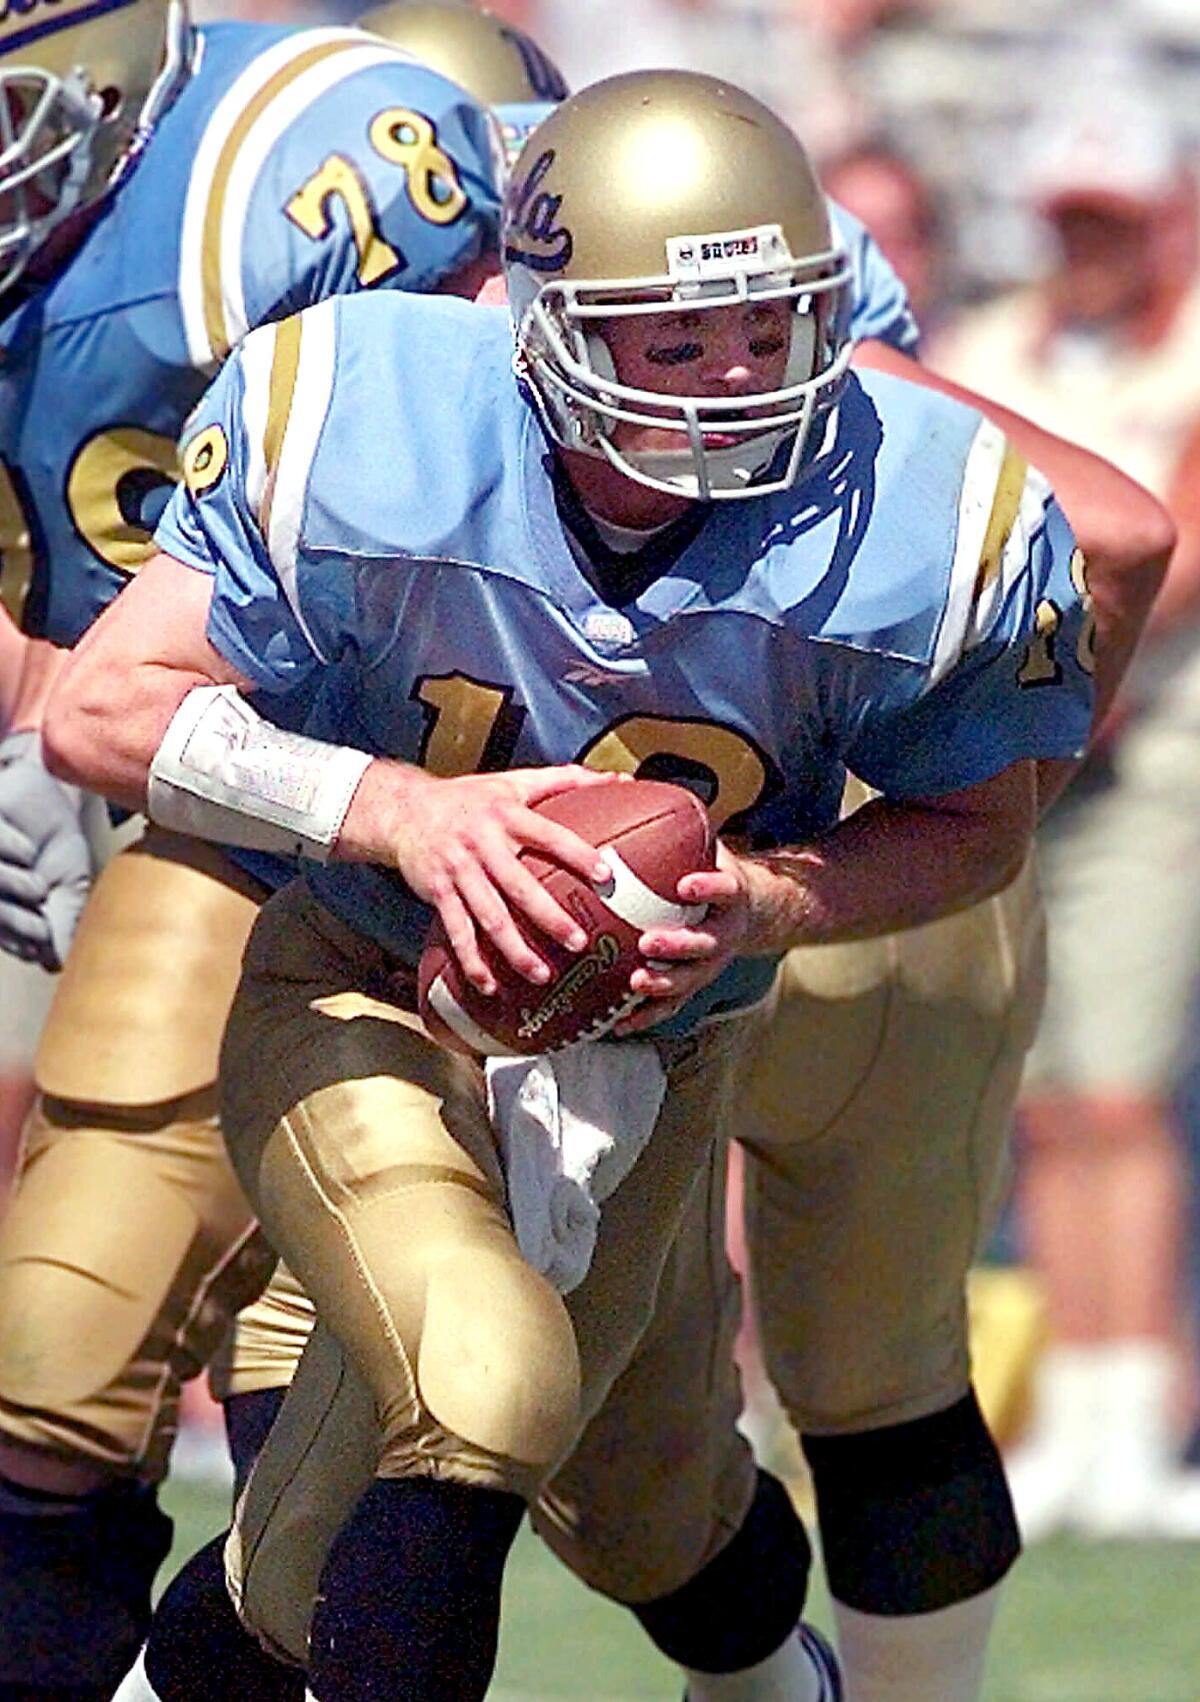 UCLA's Cade McNown led the Bruins to victory over the Trojans for the fourth time in his UCLA career in the 1998 game. He is the only UCLA quarterback to do so.